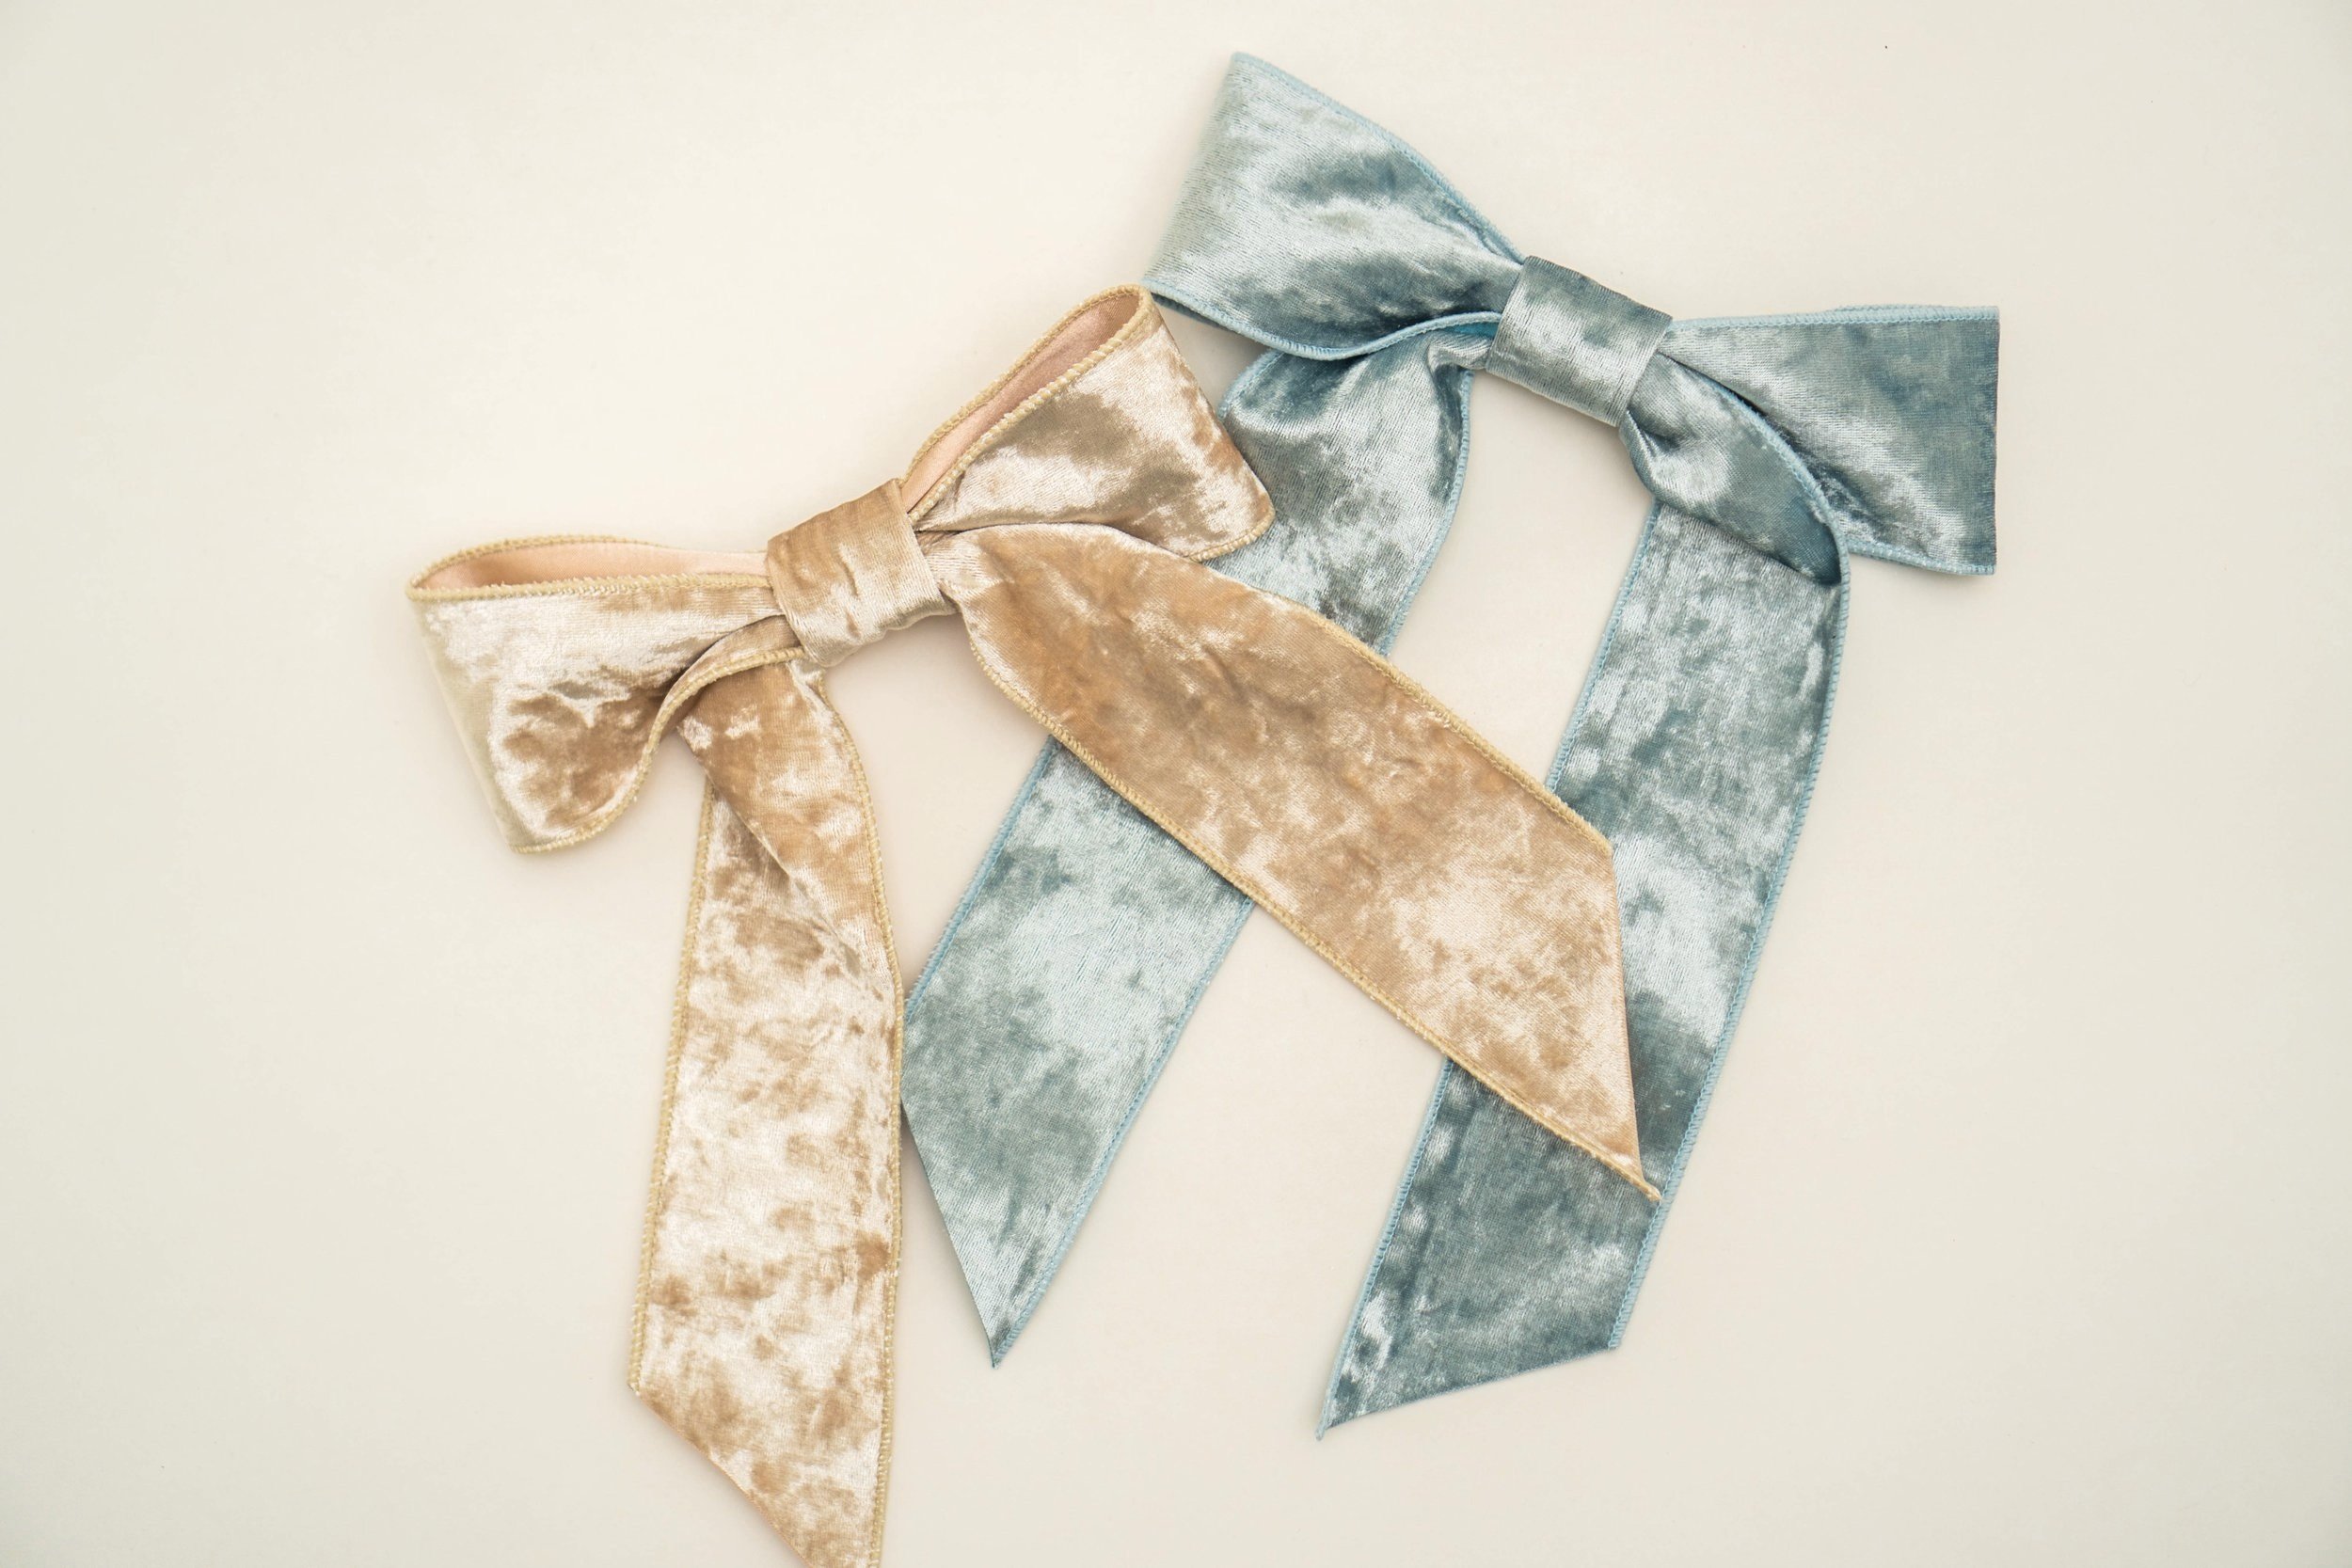 How to Make a Bow out of Ribbon, DIY Hair Bows, Hair Accessories